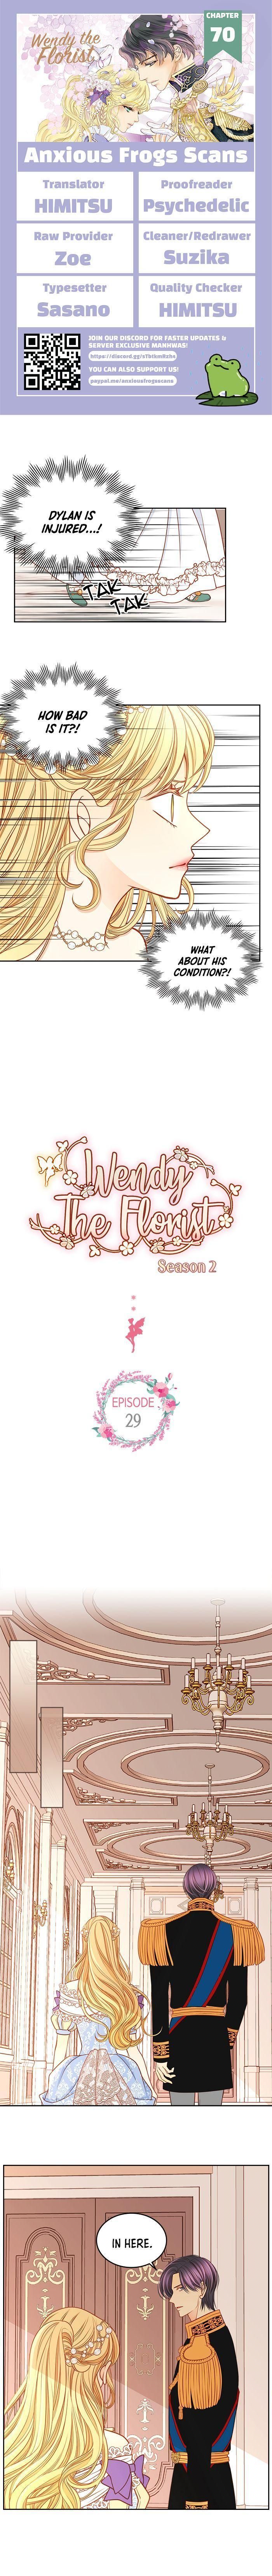 Wendy The Florist Chapter 70 page 1